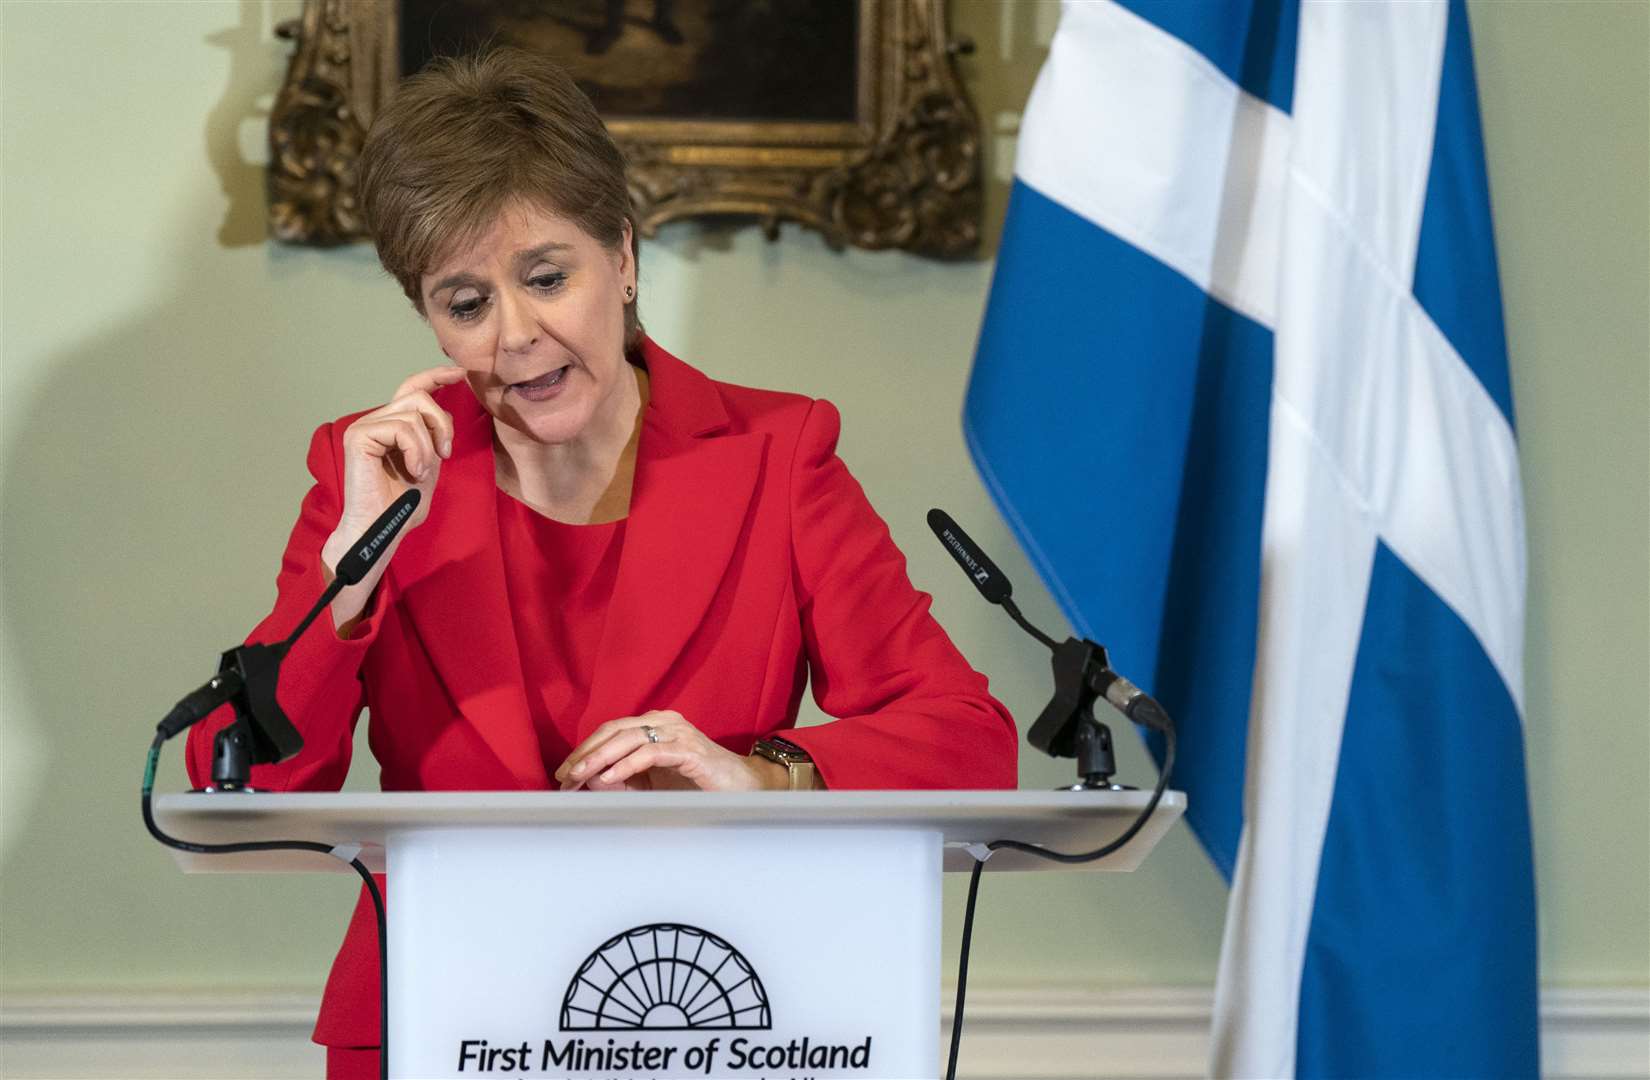 First Minister Nicola Sturgeon speaking during a press conference at Bute House (Jane Barlow/PA)